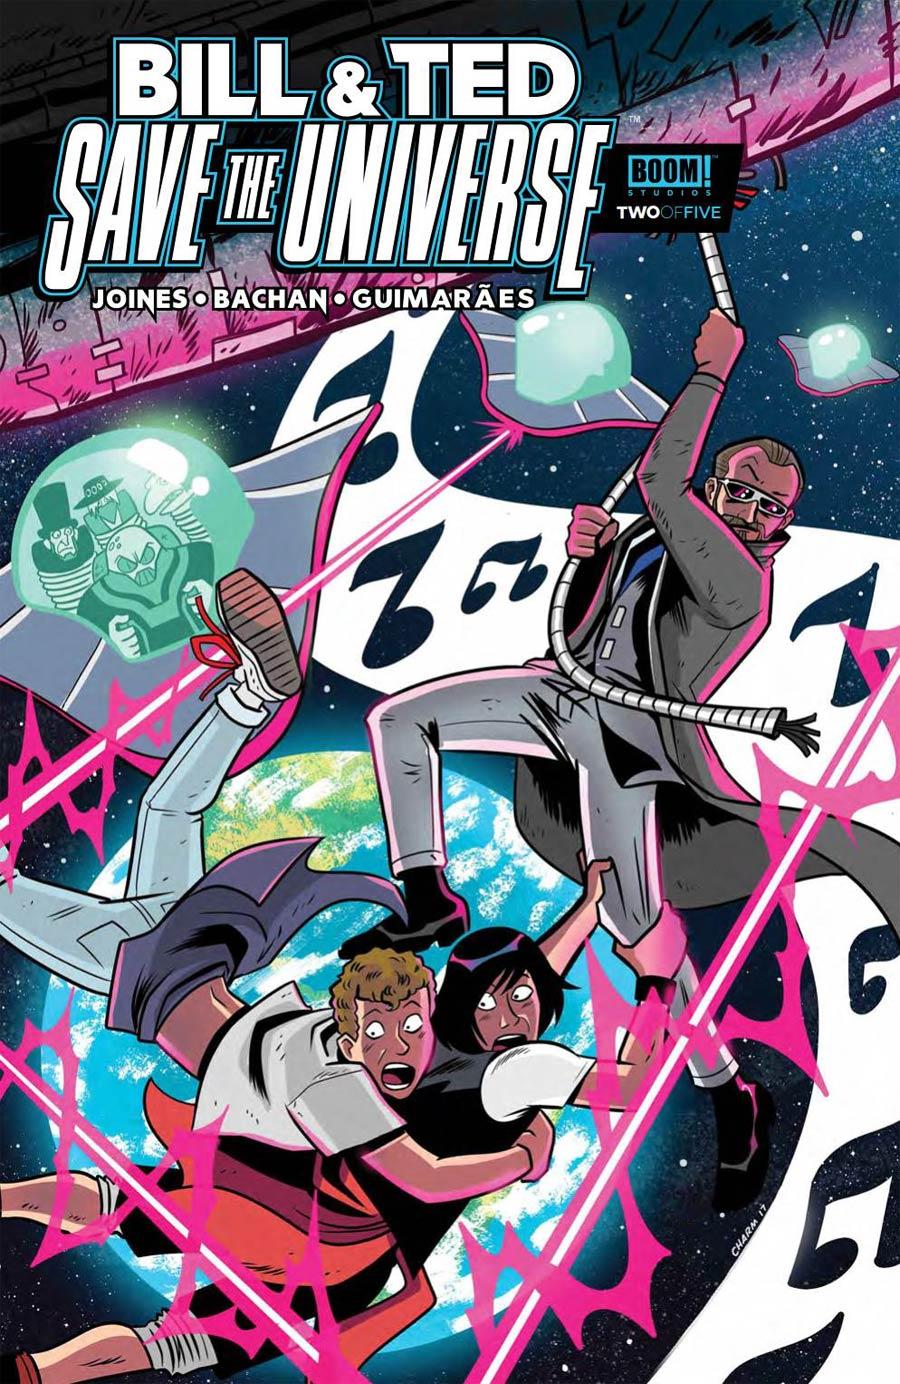 Bill & Ted Save The Universe Vol. 1 #2